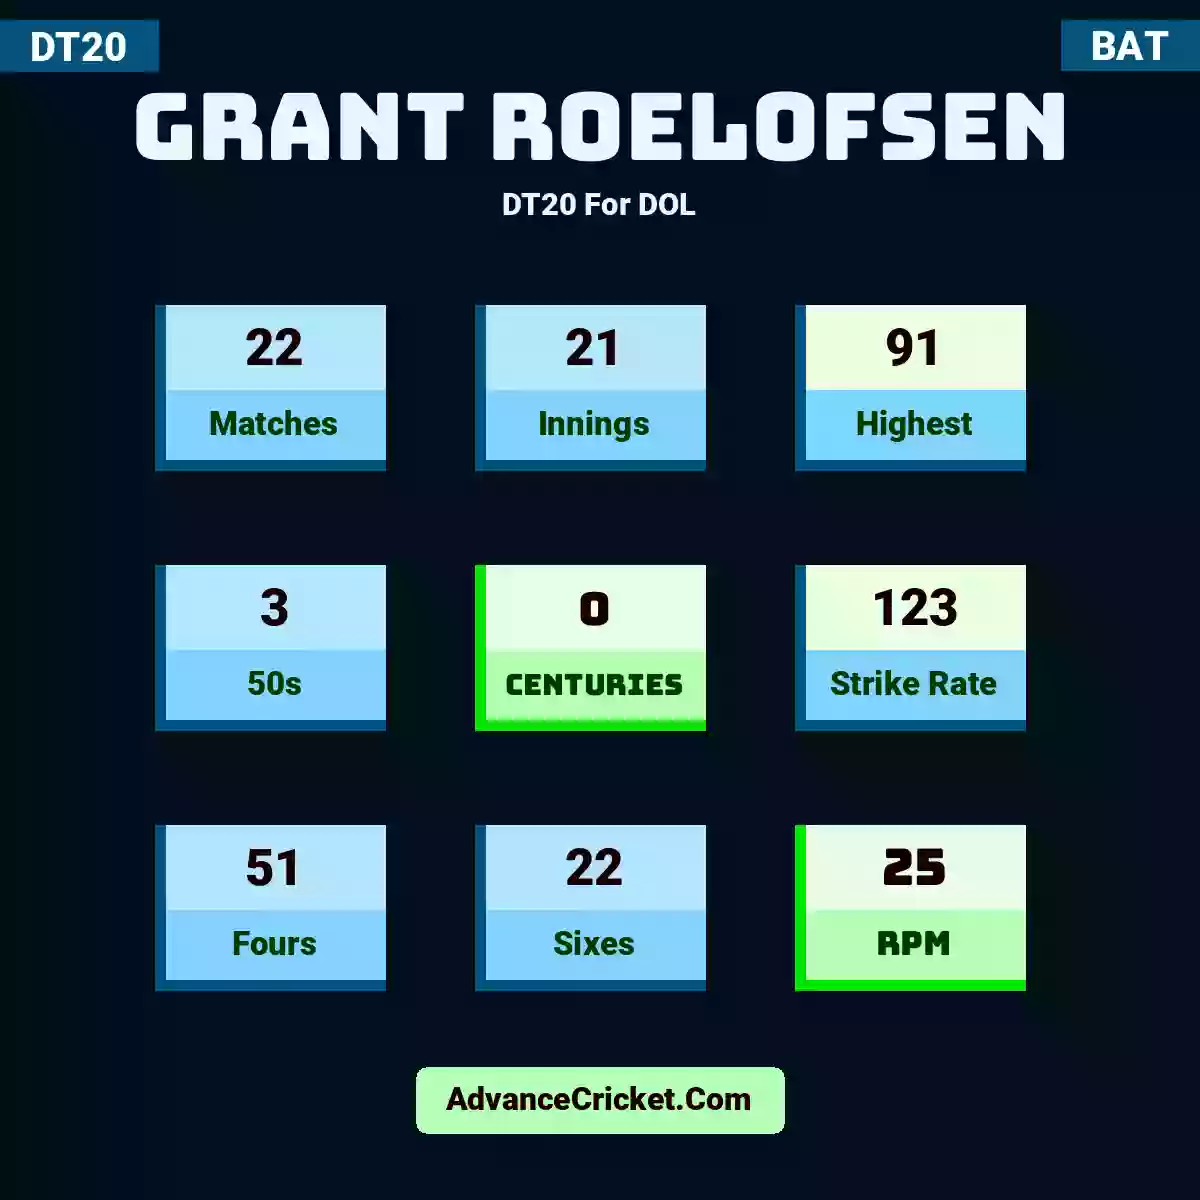 Grant Roelofsen DT20  For DOL, Grant Roelofsen played 22 matches, scored 91 runs as highest, 3 half-centuries, and 0 centuries, with a strike rate of 123. G.Roelofsen hit 51 fours and 22 sixes, with an RPM of 25.